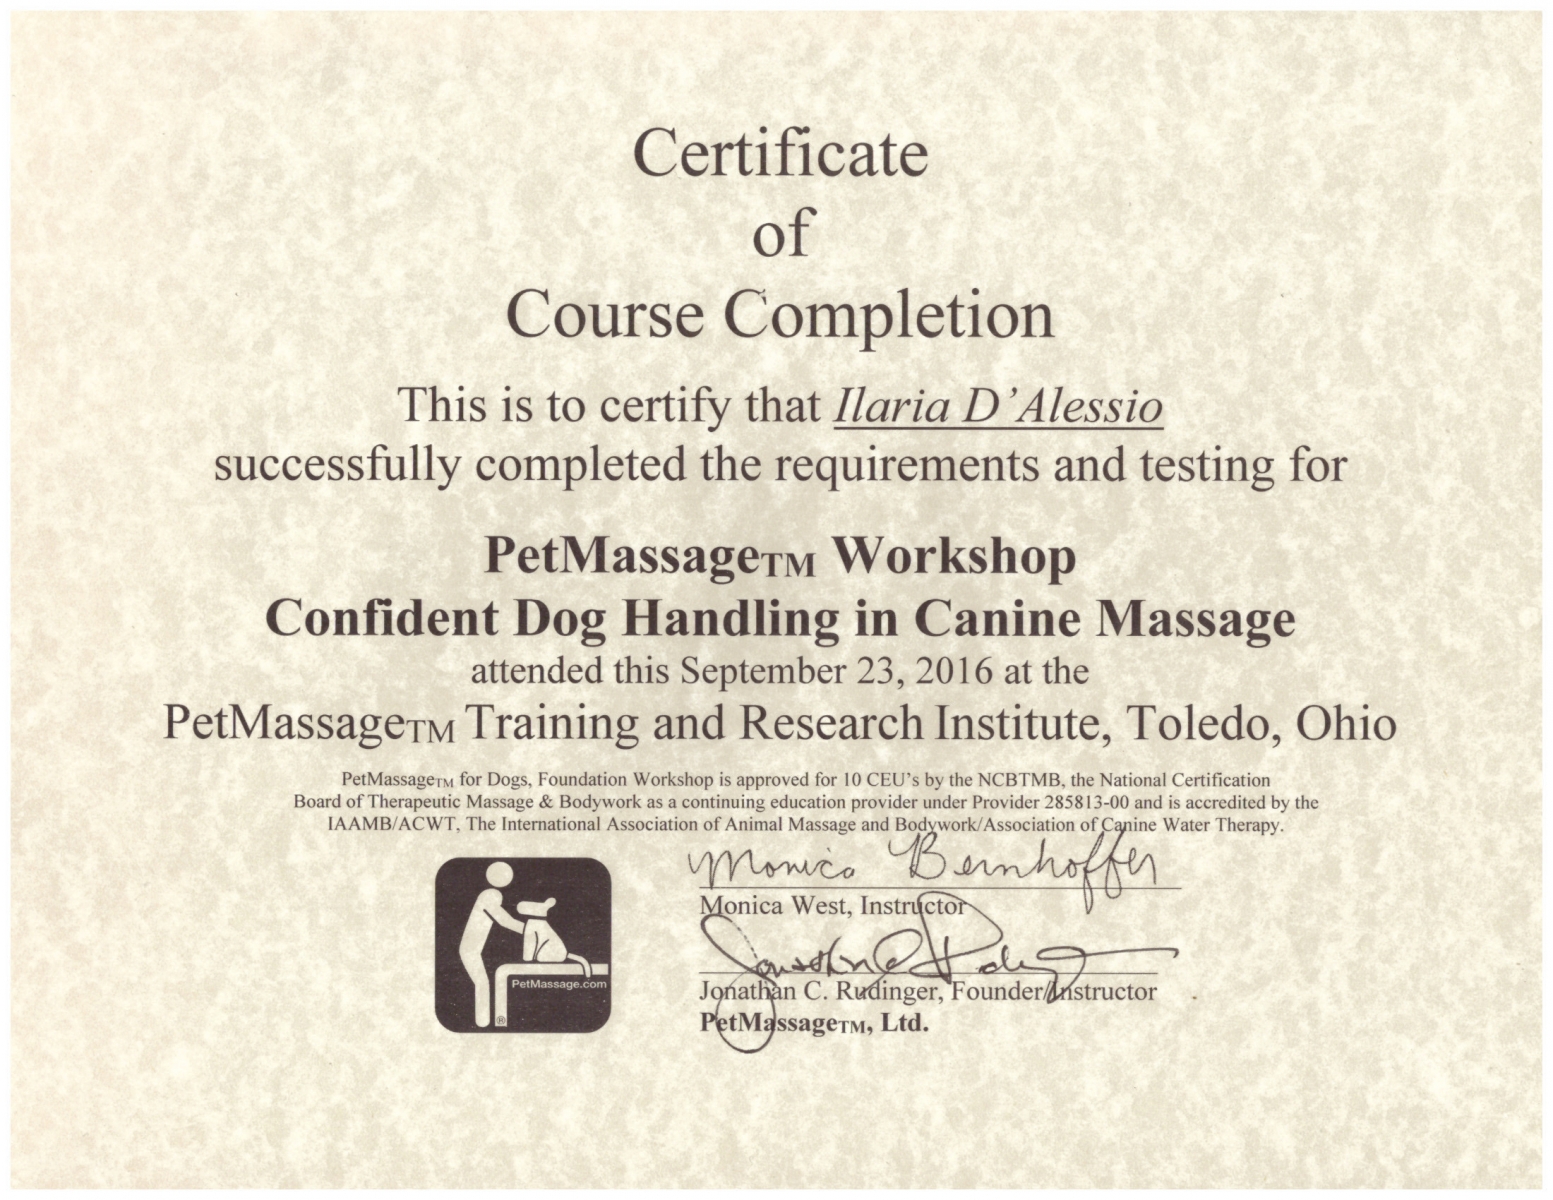 DIPLOMA CONFIDENT DOG HANDLING IN CANINE MASSAGE